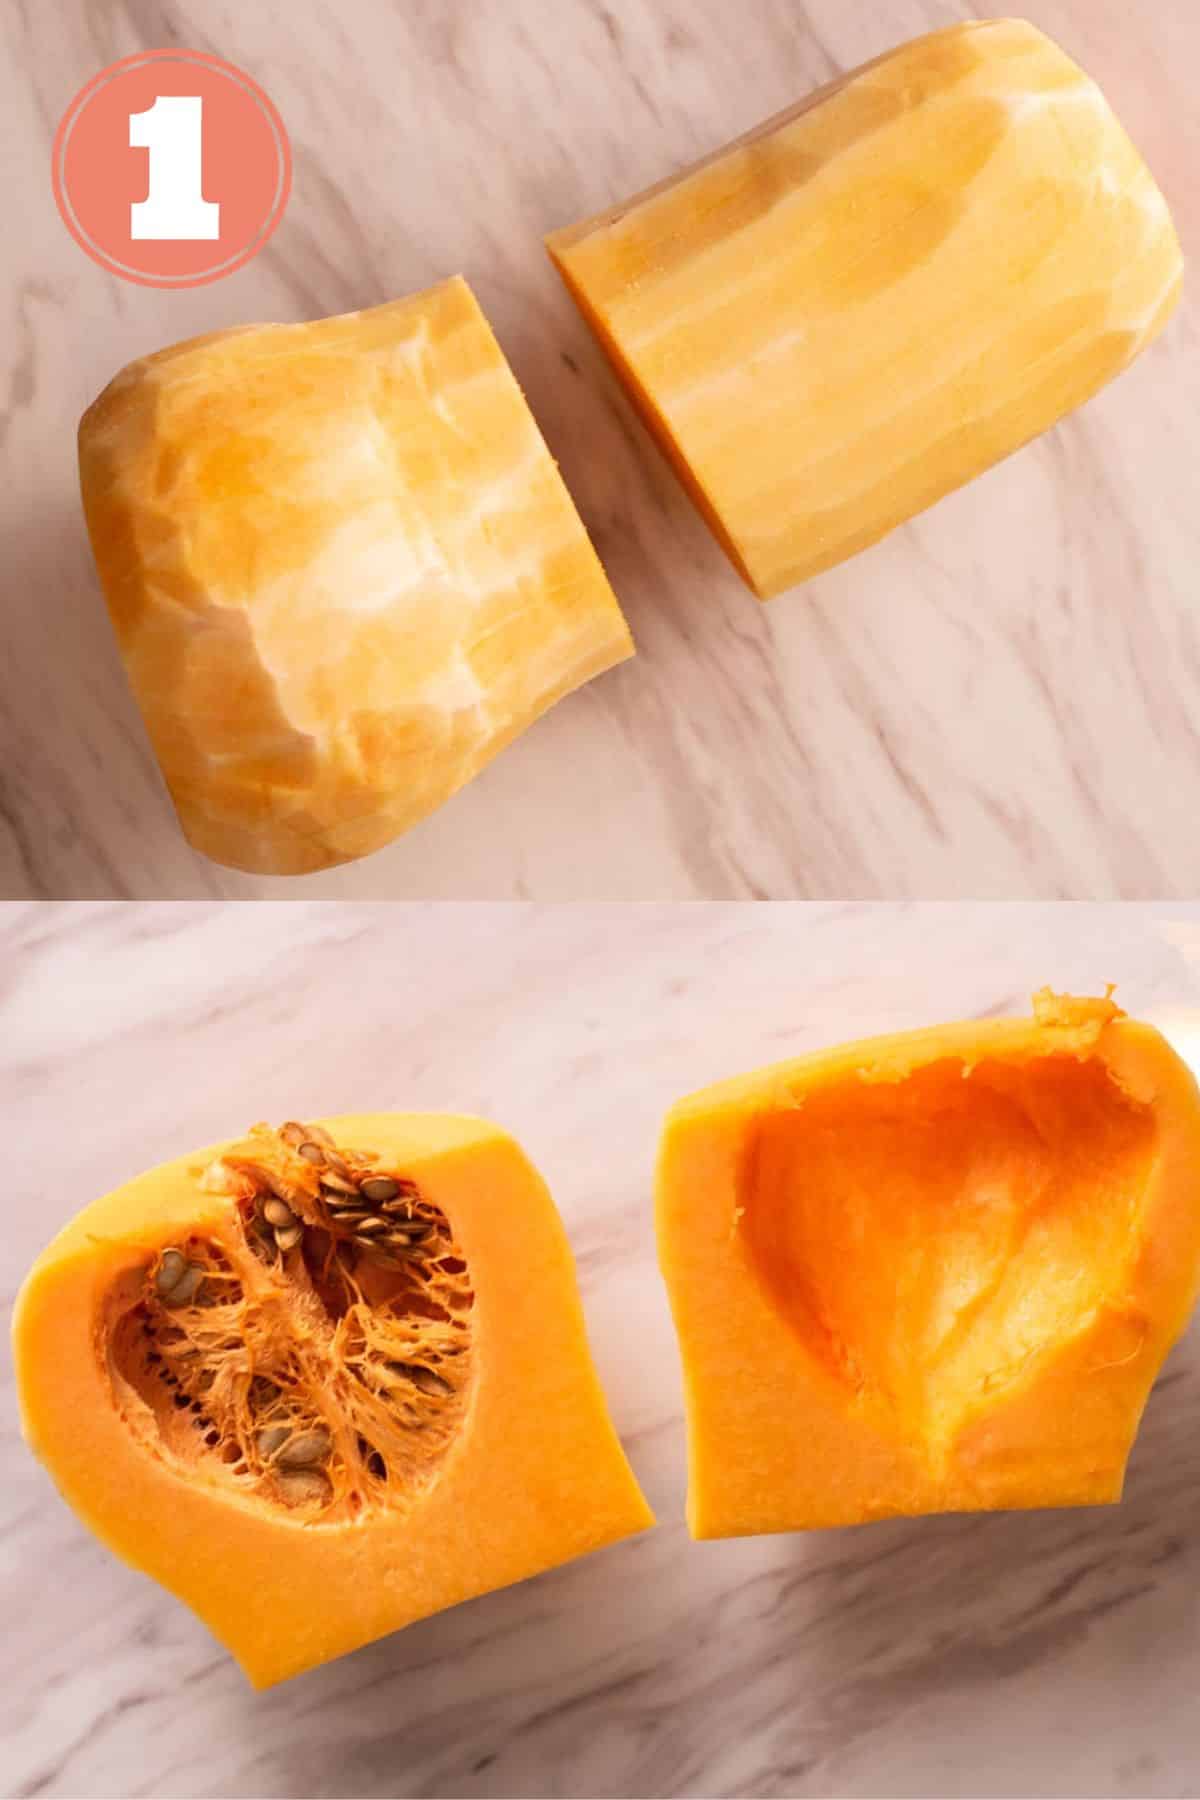 Peeled squash before and after slicing in half.